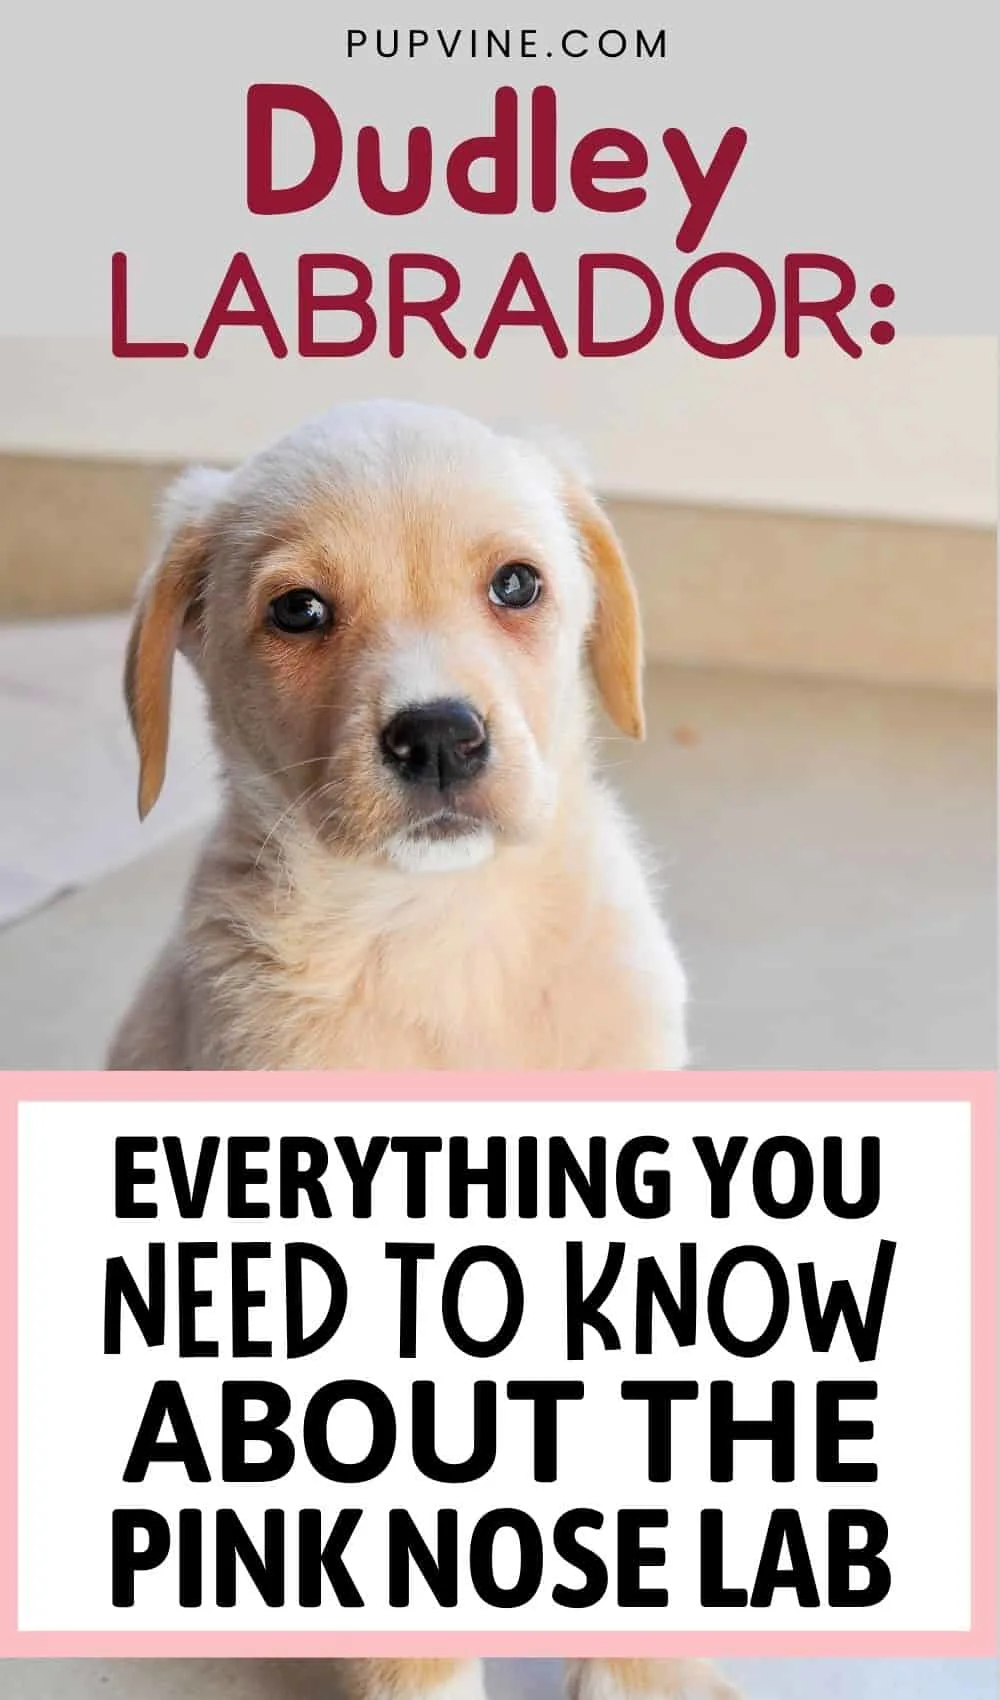 Dudley Labrador Everything You Need To Know About The Pink Nose Lab